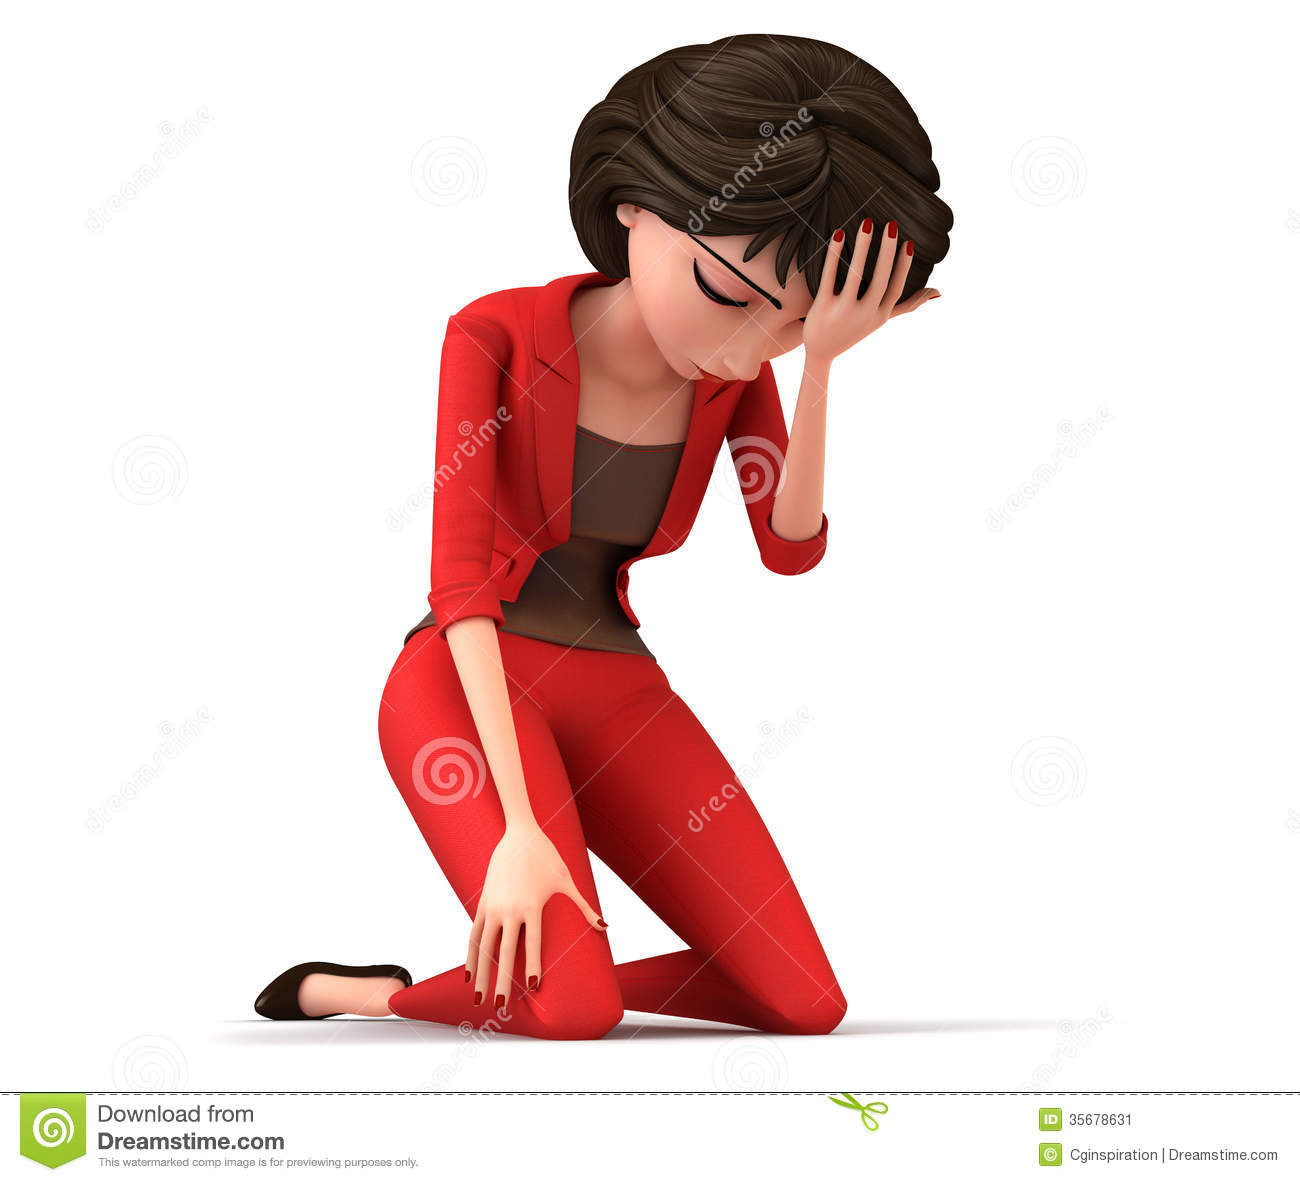 Exhausted Businesswoman Stock Image   Image  35678631